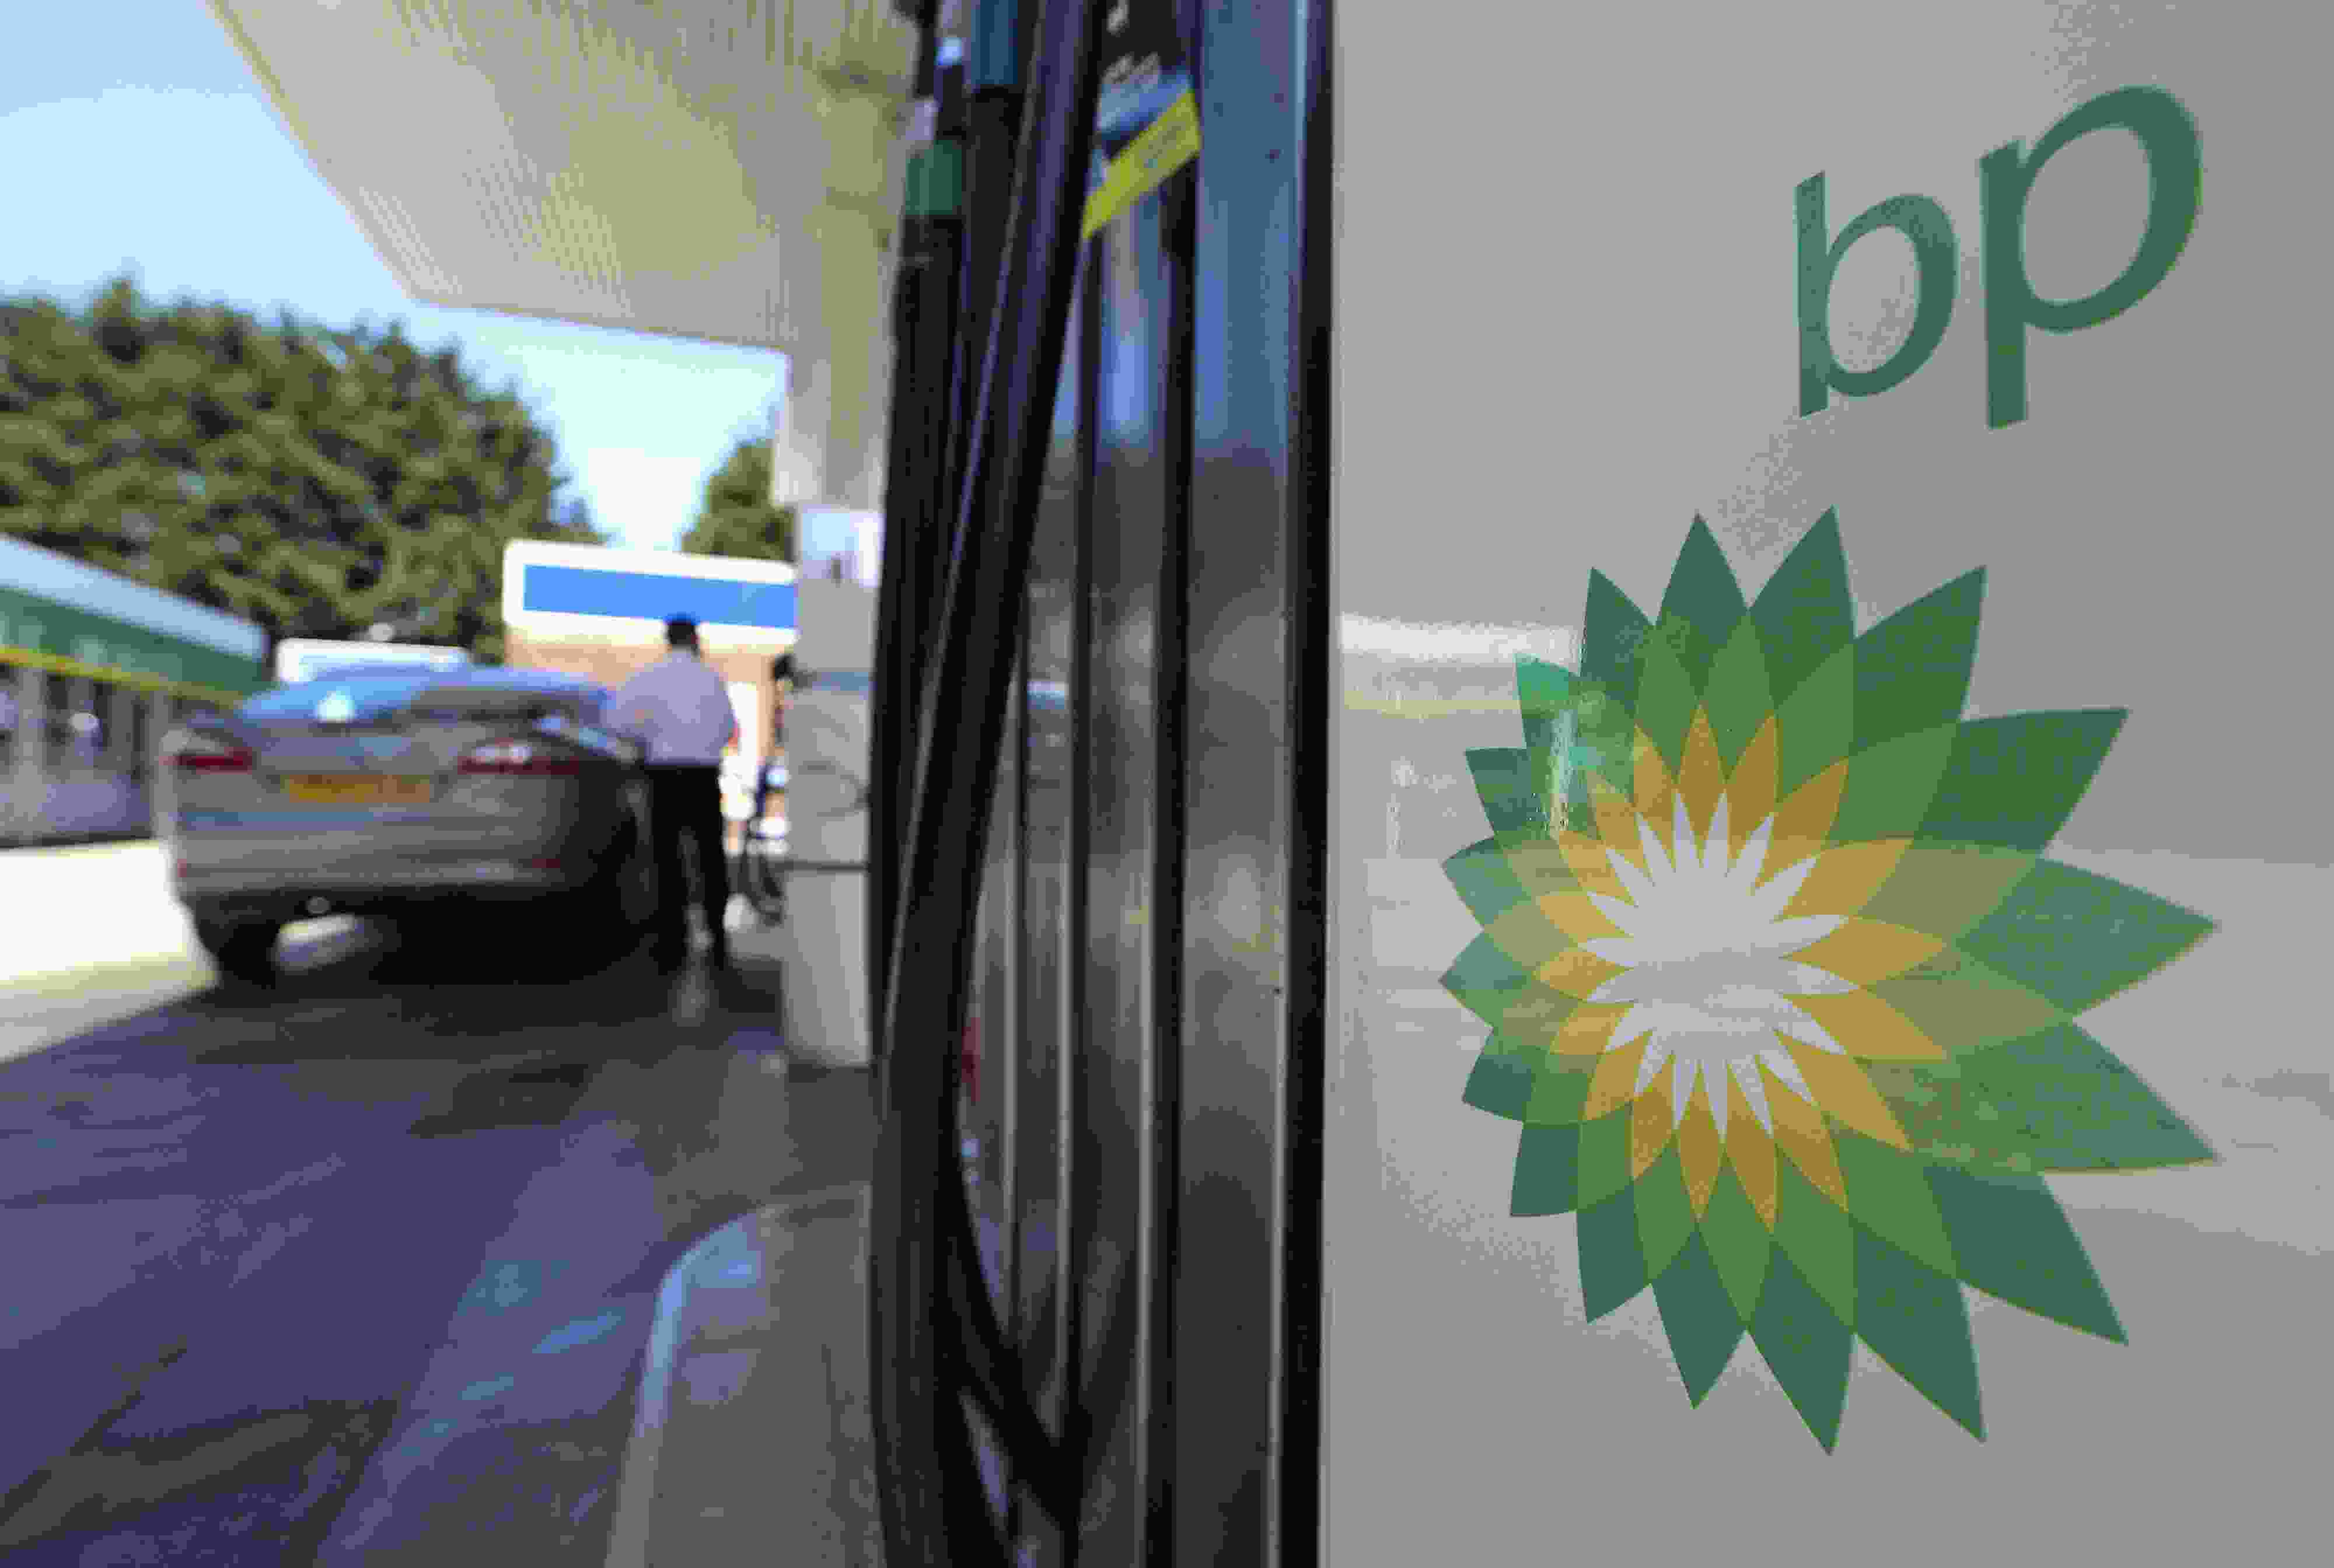 Oil giant BP says it wants to have net-zero emissions by 2050